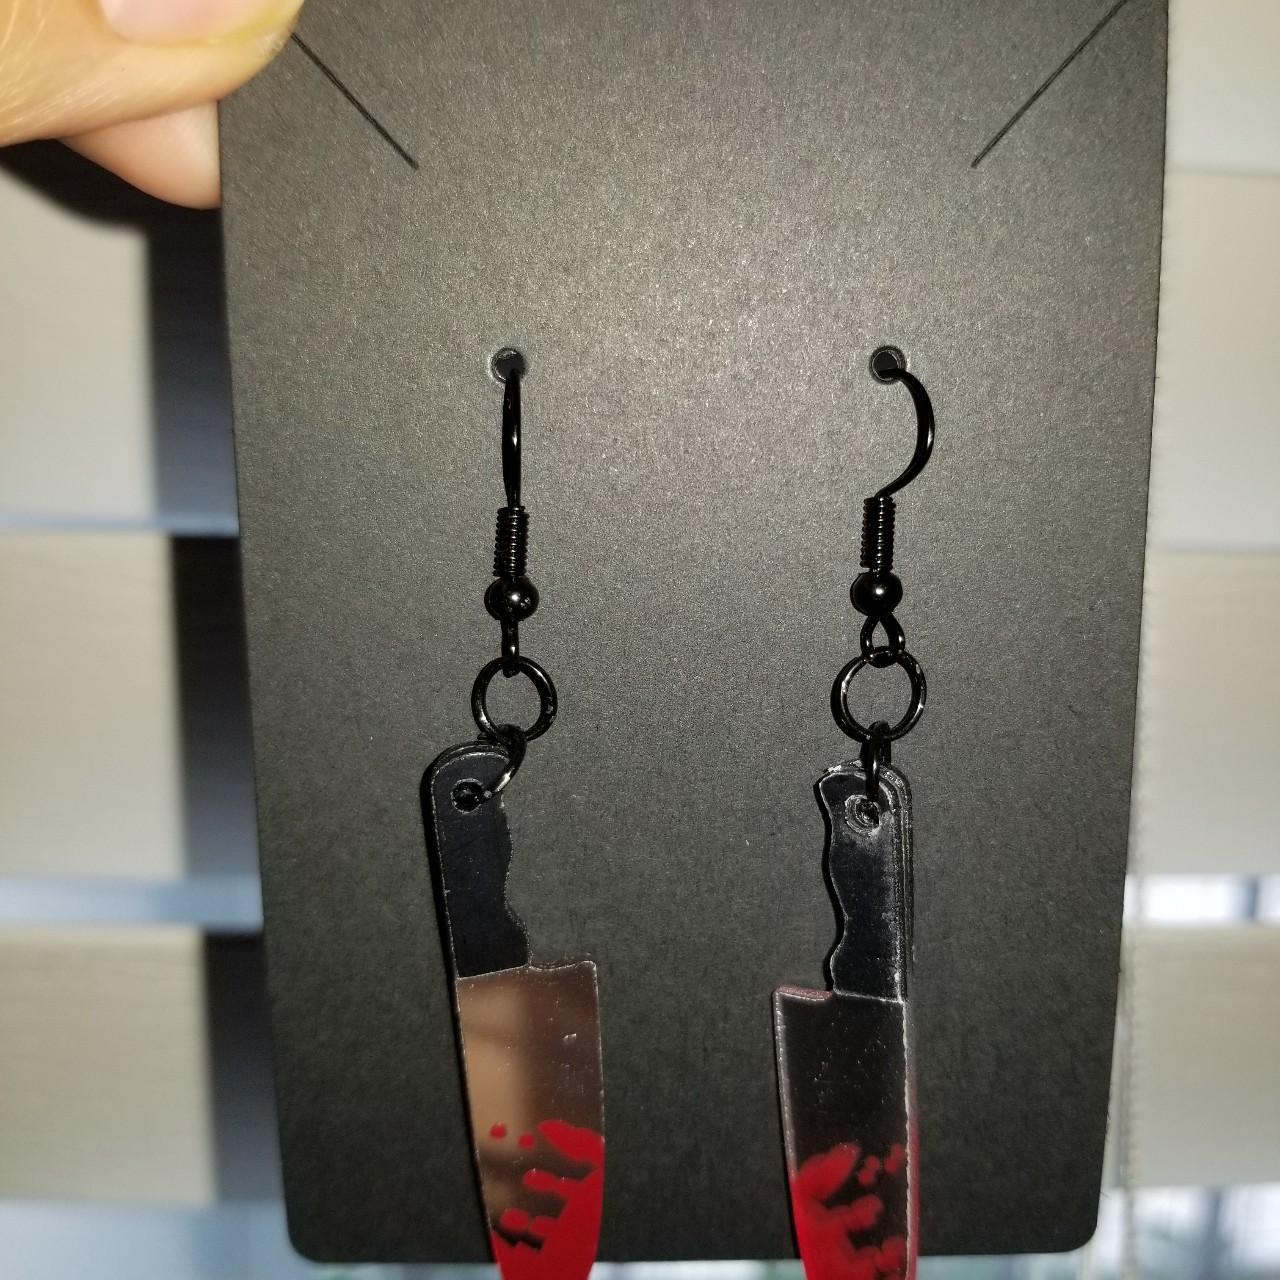 Women's Black and Red Jewellery